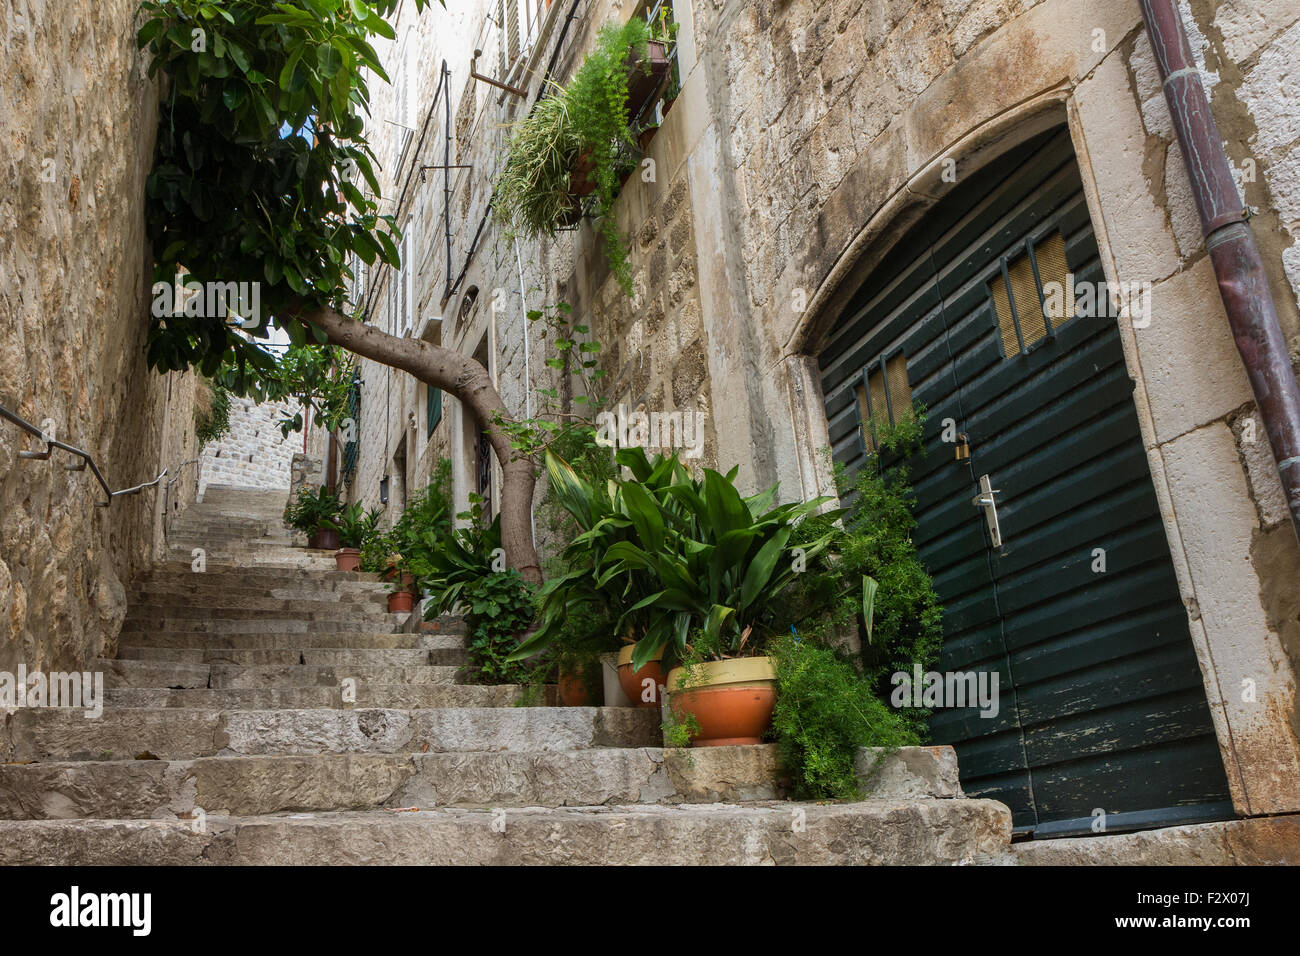 Narrow and empty alley, stairs and potted plants at the Old Town in Dubrovnik, Croatia, viewed from below. Stock Photo